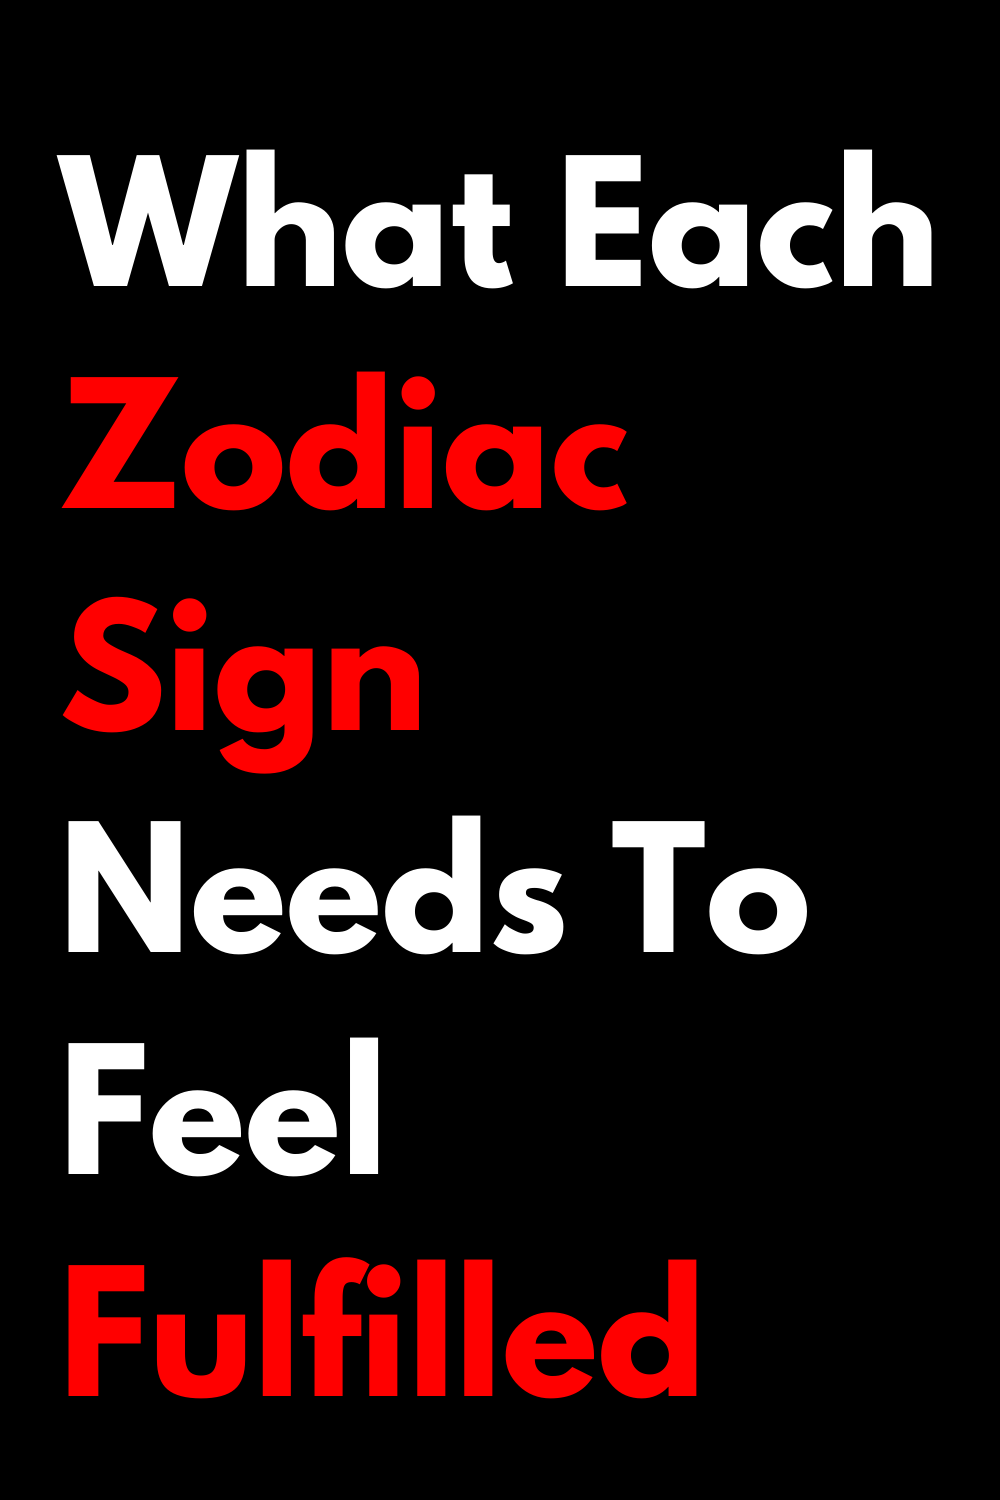 What Each Zodiac Sign Needs To Feel Fulfilled